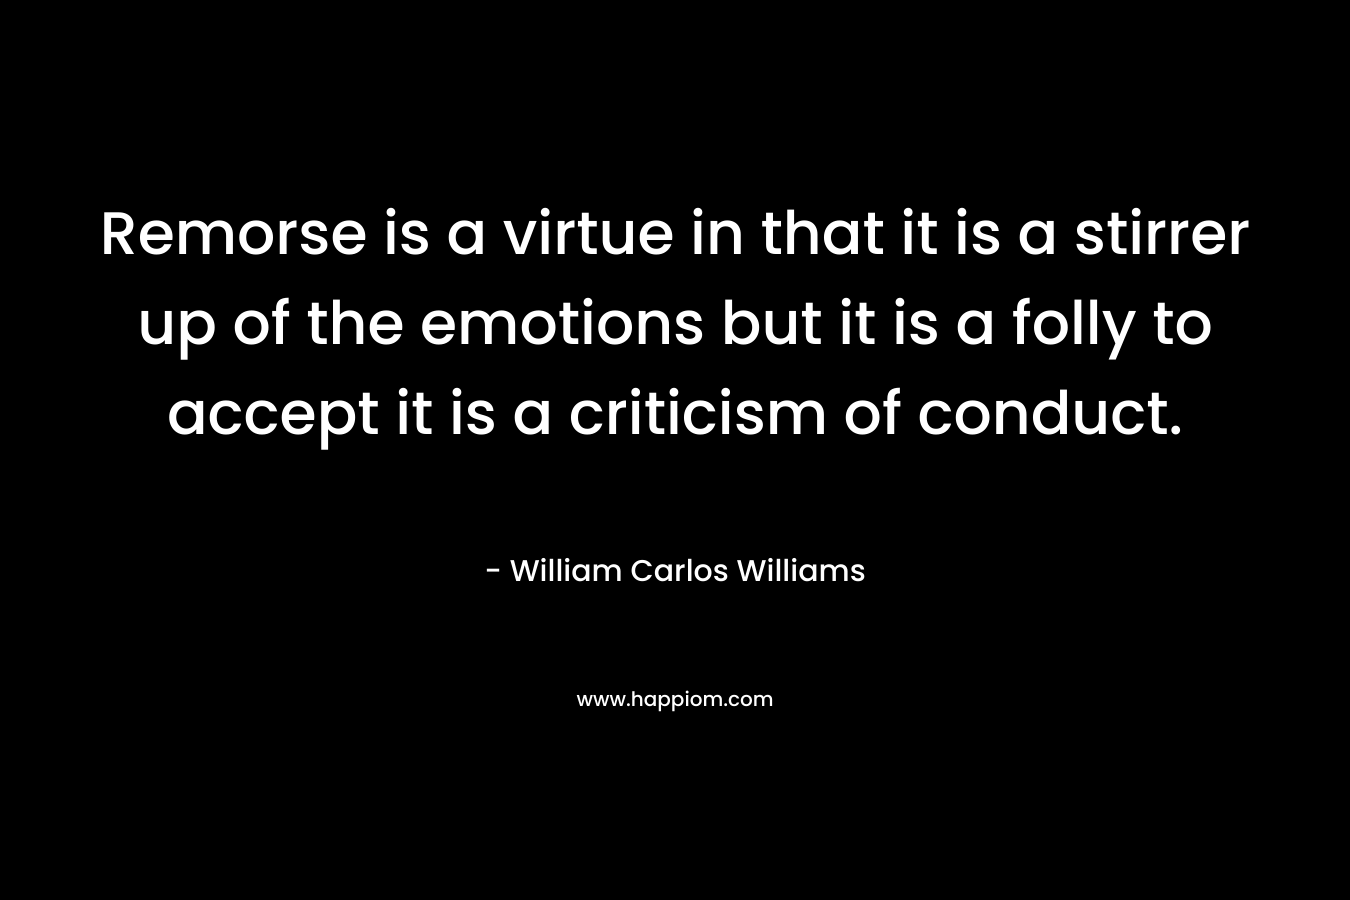 Remorse is a virtue in that it is a stirrer up of the emotions but it is a folly to accept it is a criticism of conduct. – William Carlos Williams